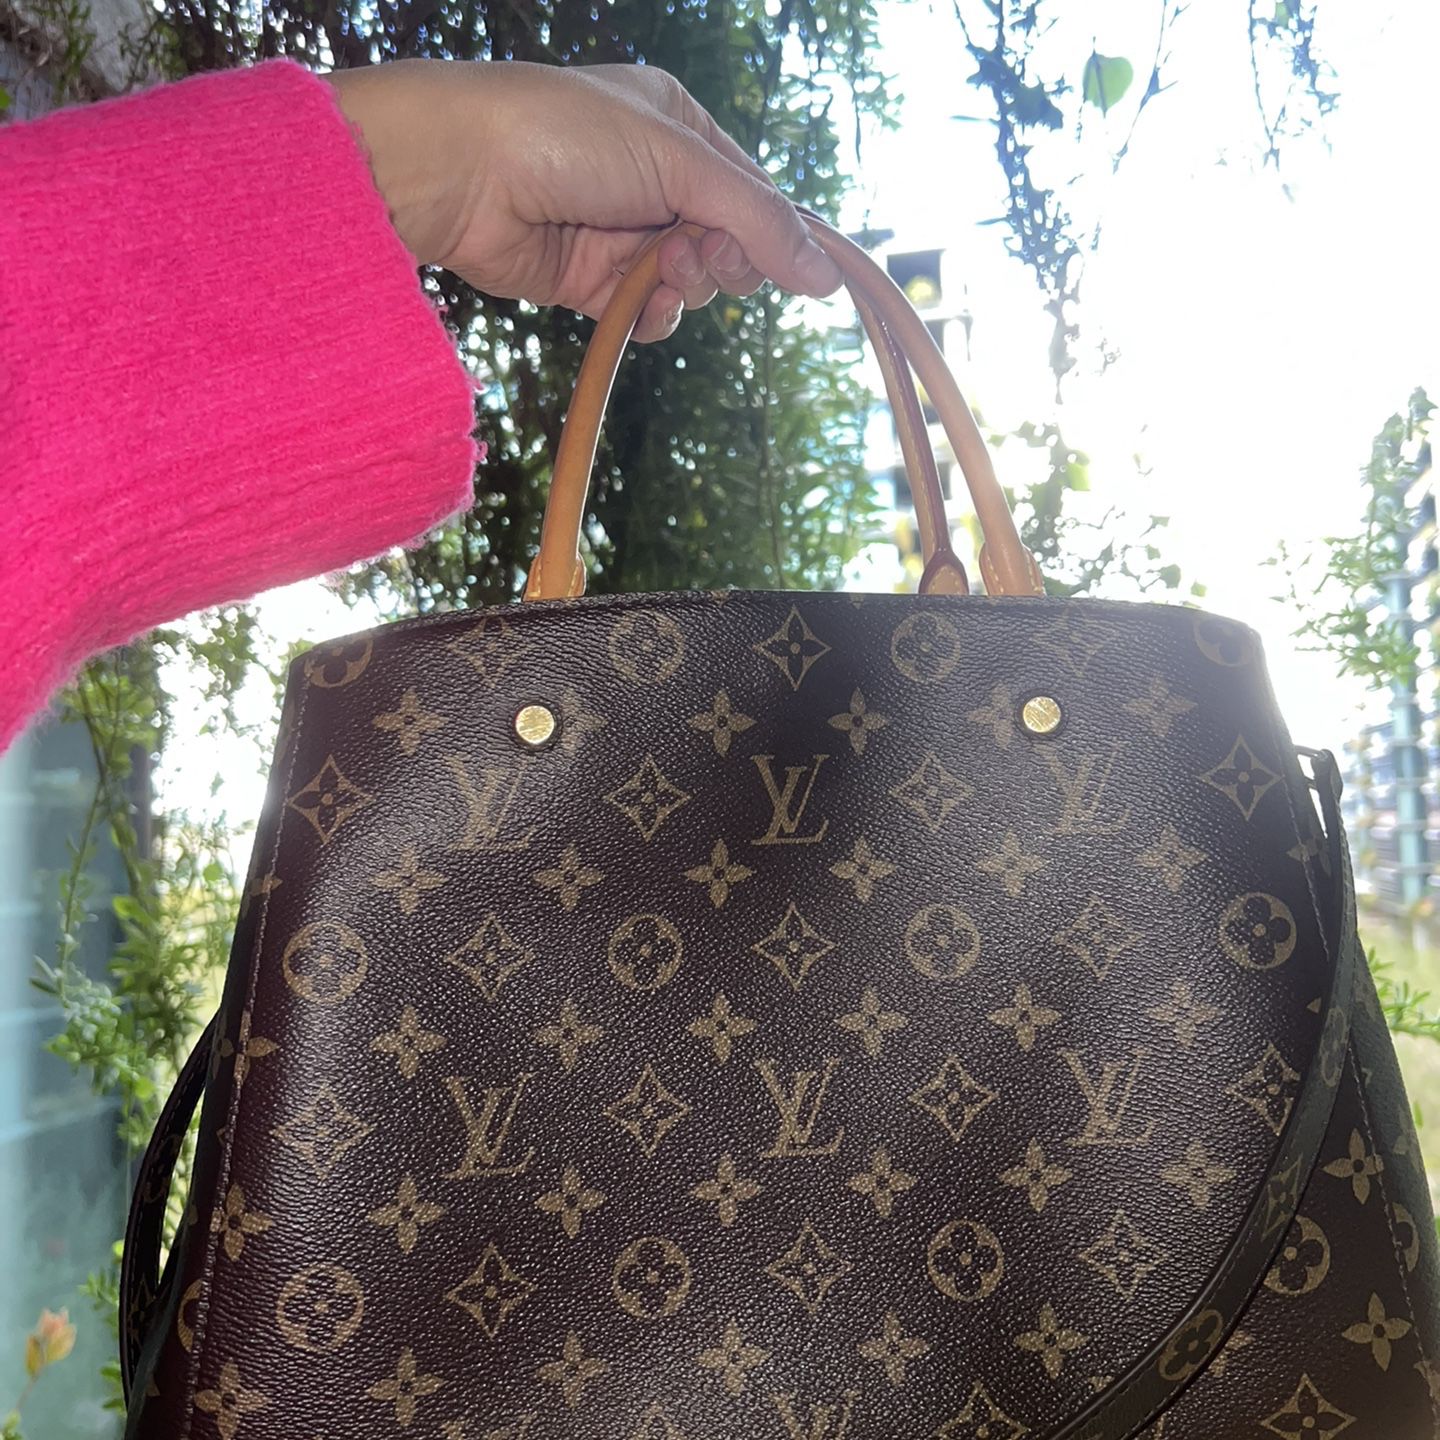 My first Louis Vuitton purchased in Scottsdale on Saturday 😍 The